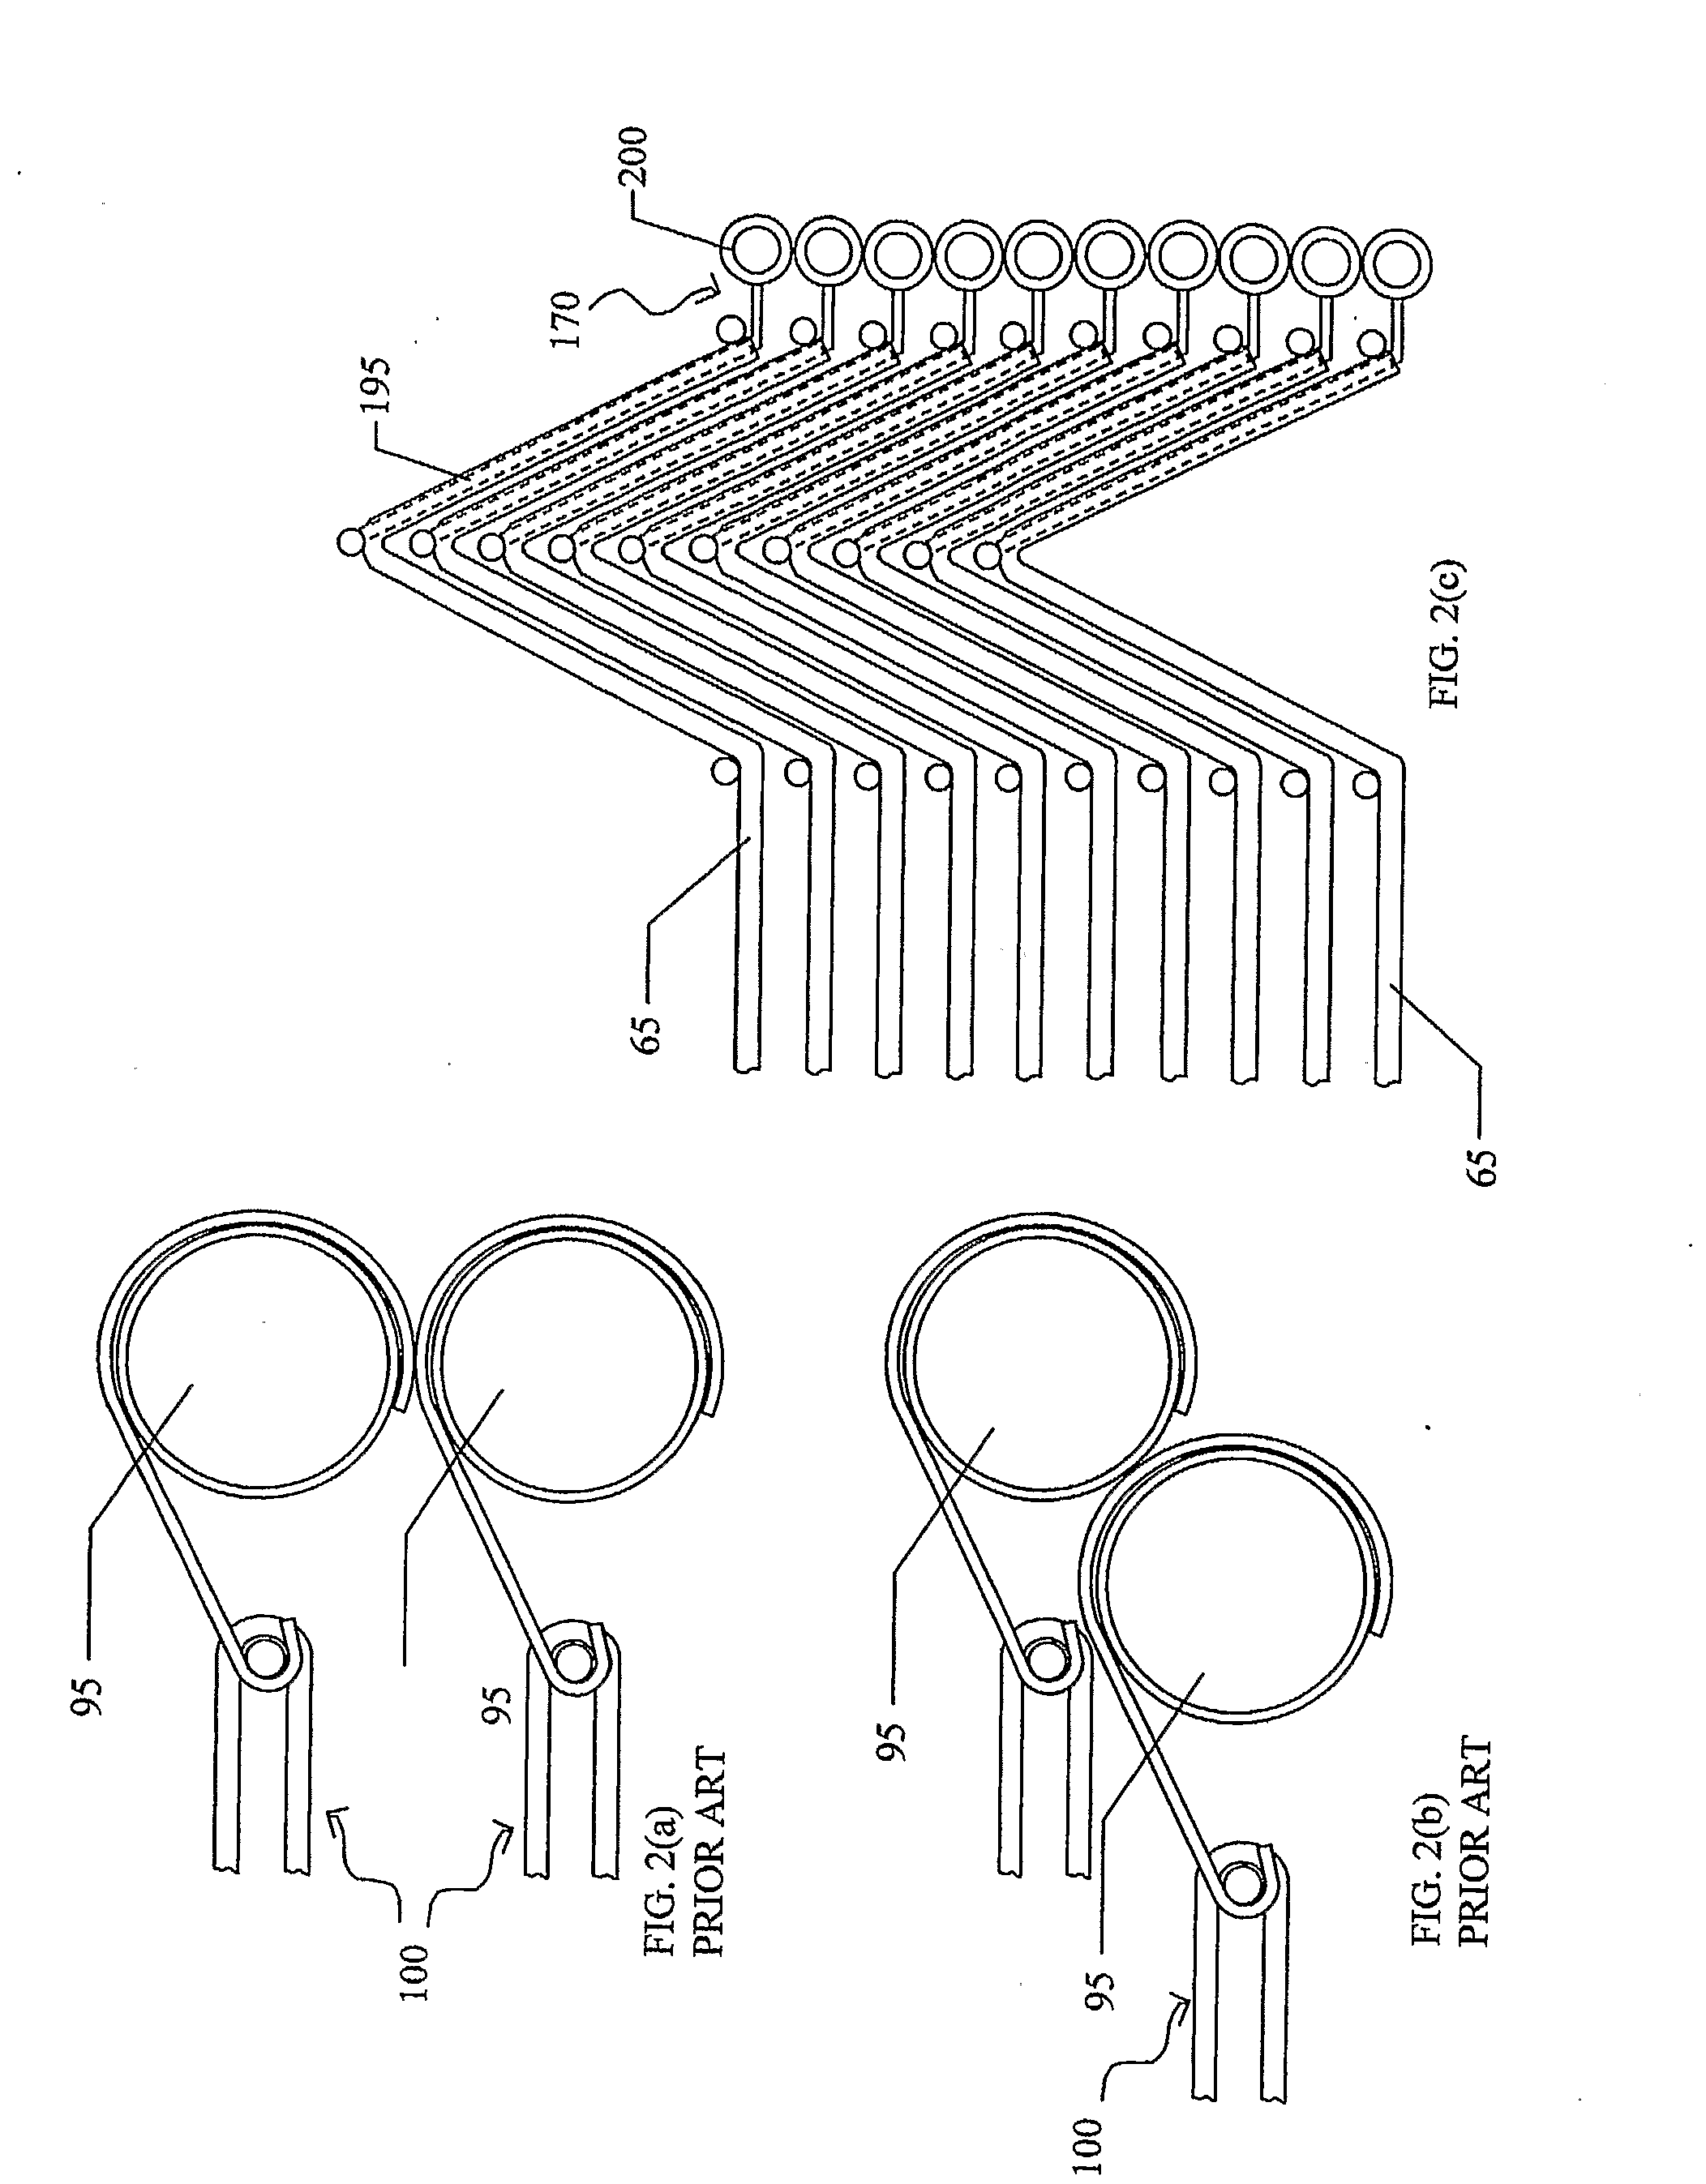 Fence apparatus and related methods